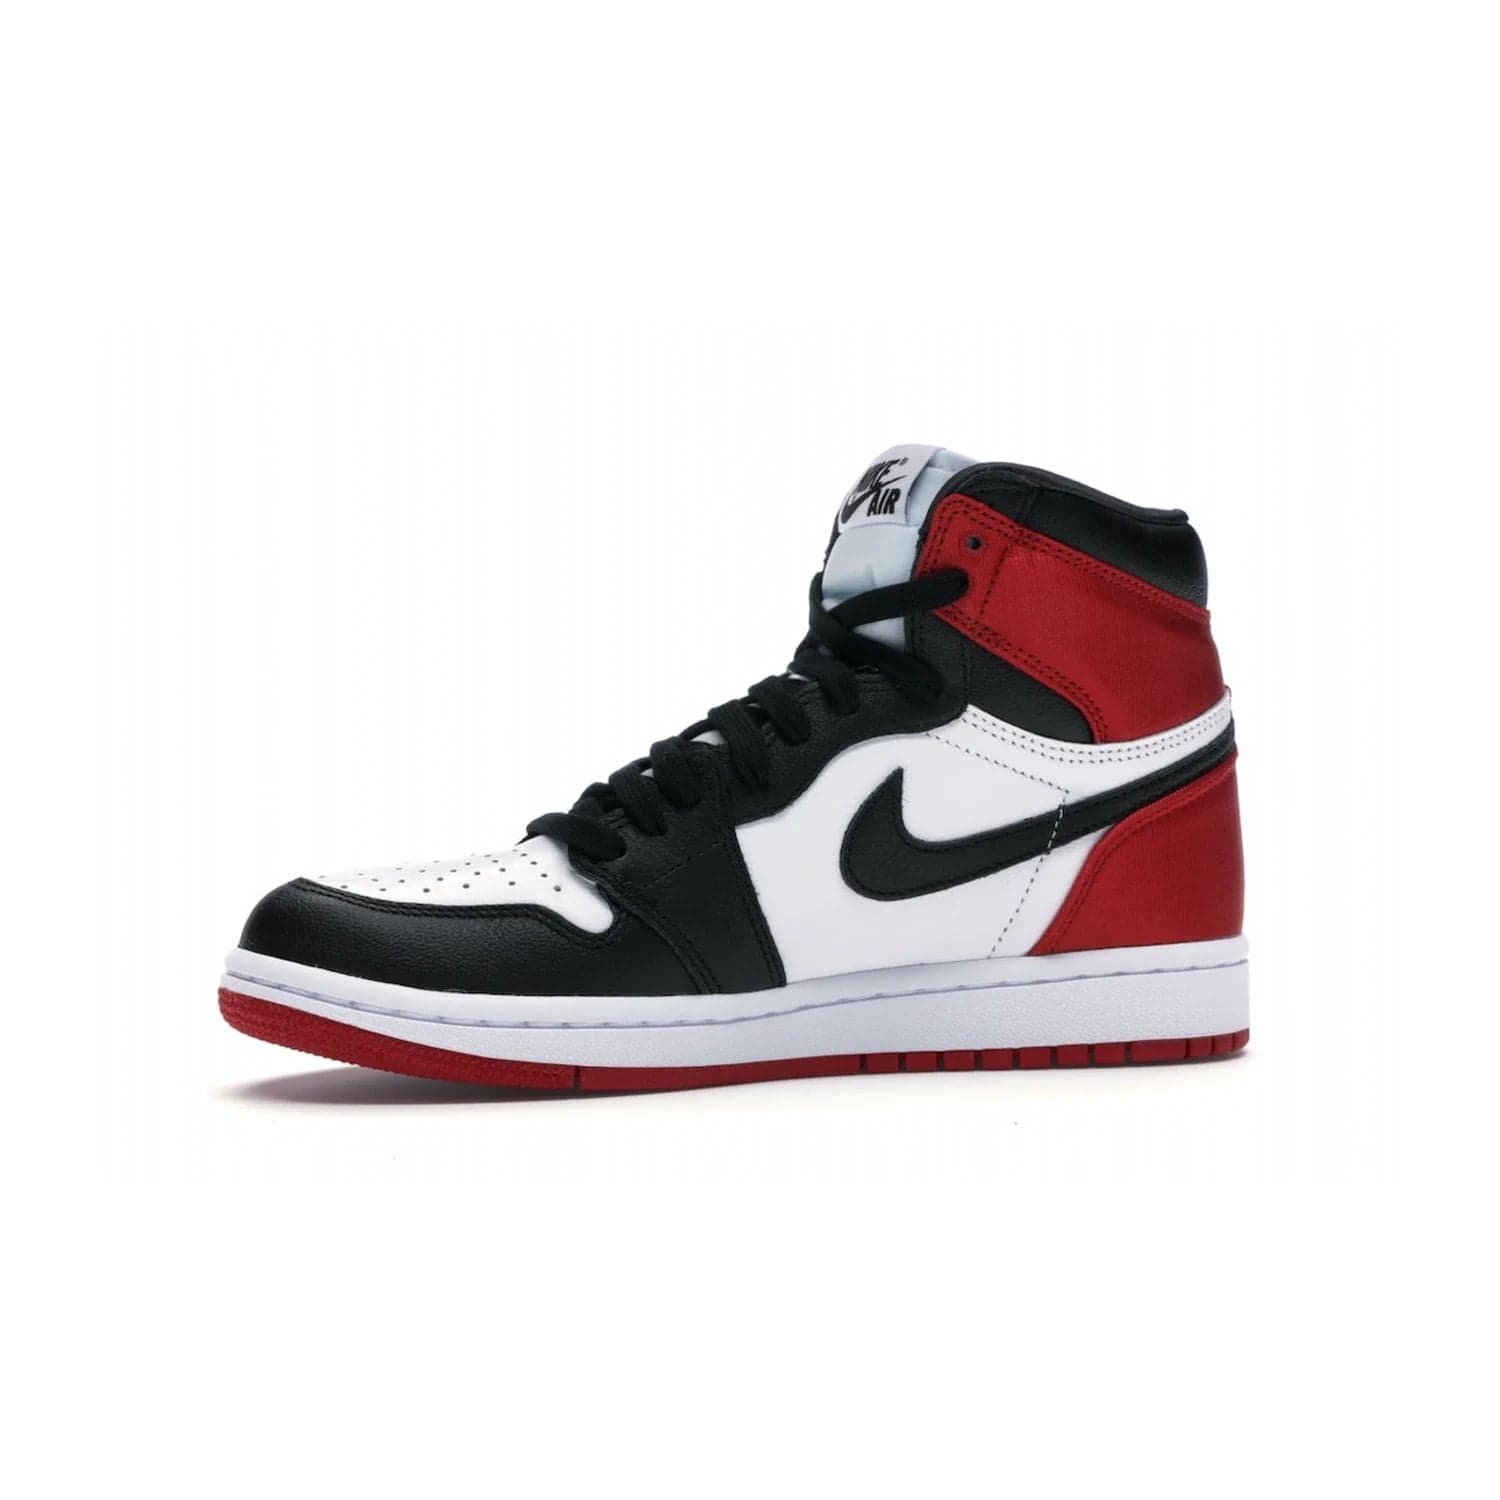 Jordan 1 Retro High Satin Black Toe (Women's) - Image 17 - Only at www.BallersClubKickz.com - Luxurious take on the timeless Air Jordan 1. Features a mix of black leather and satin materials with subtle University Red accents. Elevated look with metal Wings logo on the heel. Released in August 2019.